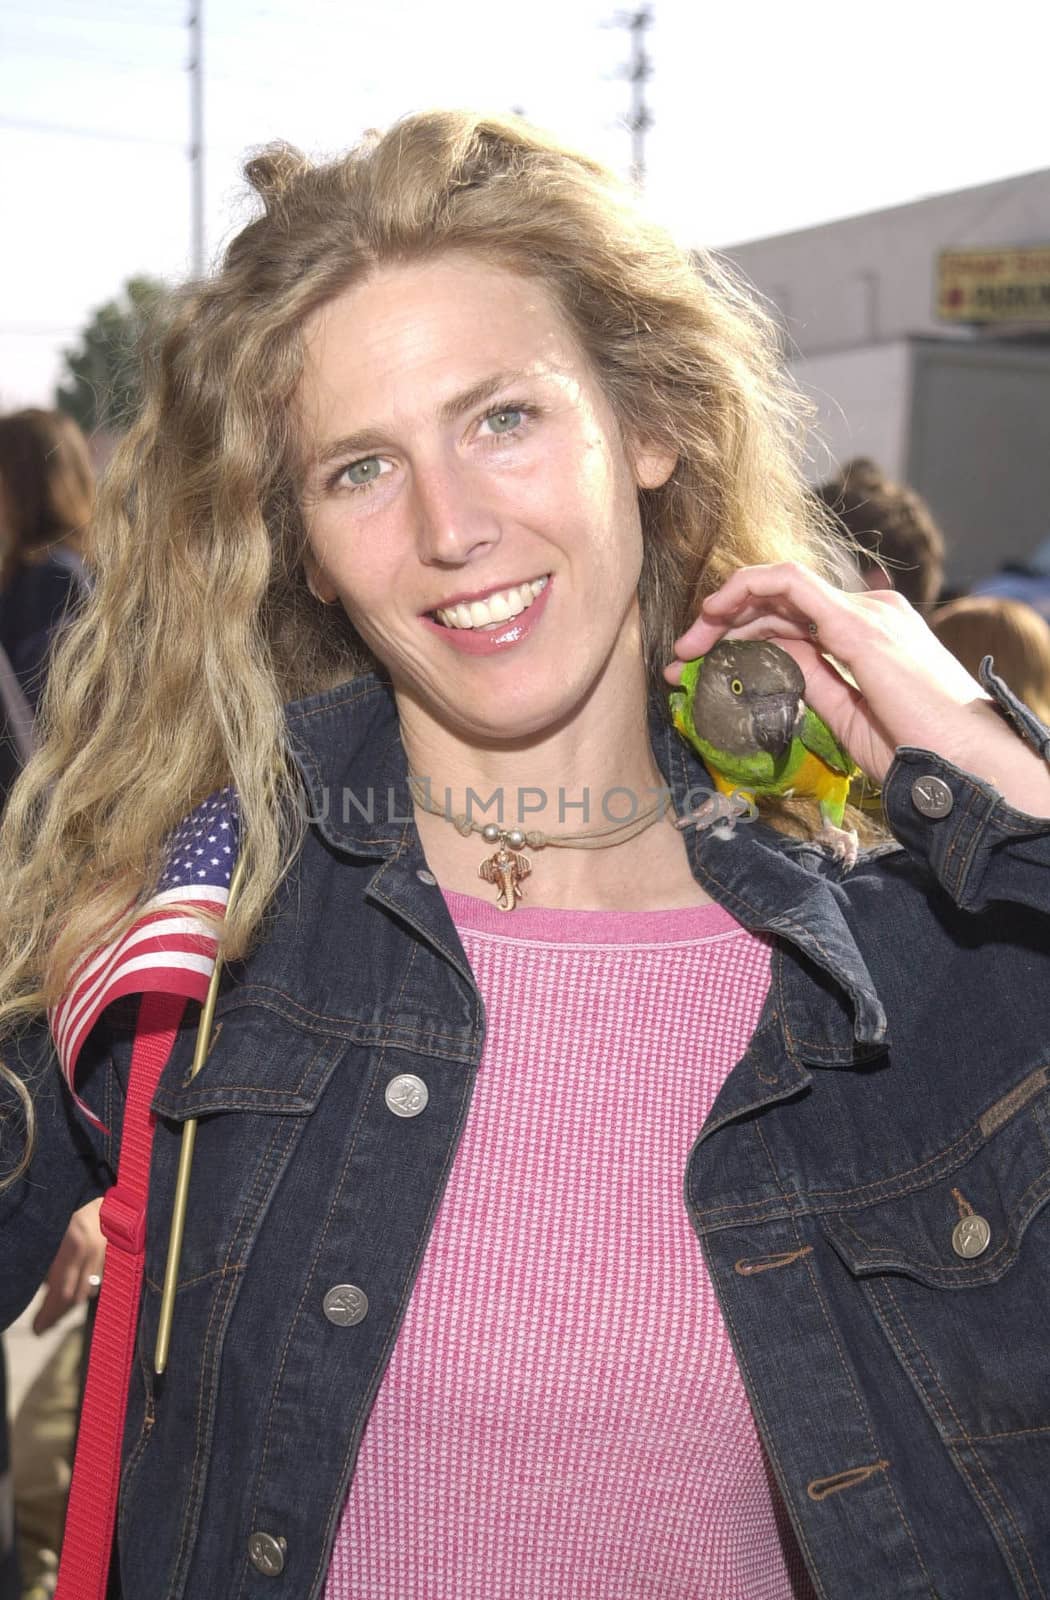 SOPHIE B. HAWKINS at the celebrity recording of "We Are Family" to benefit the victims of New York's 9-11 tragedy, 09-23-01